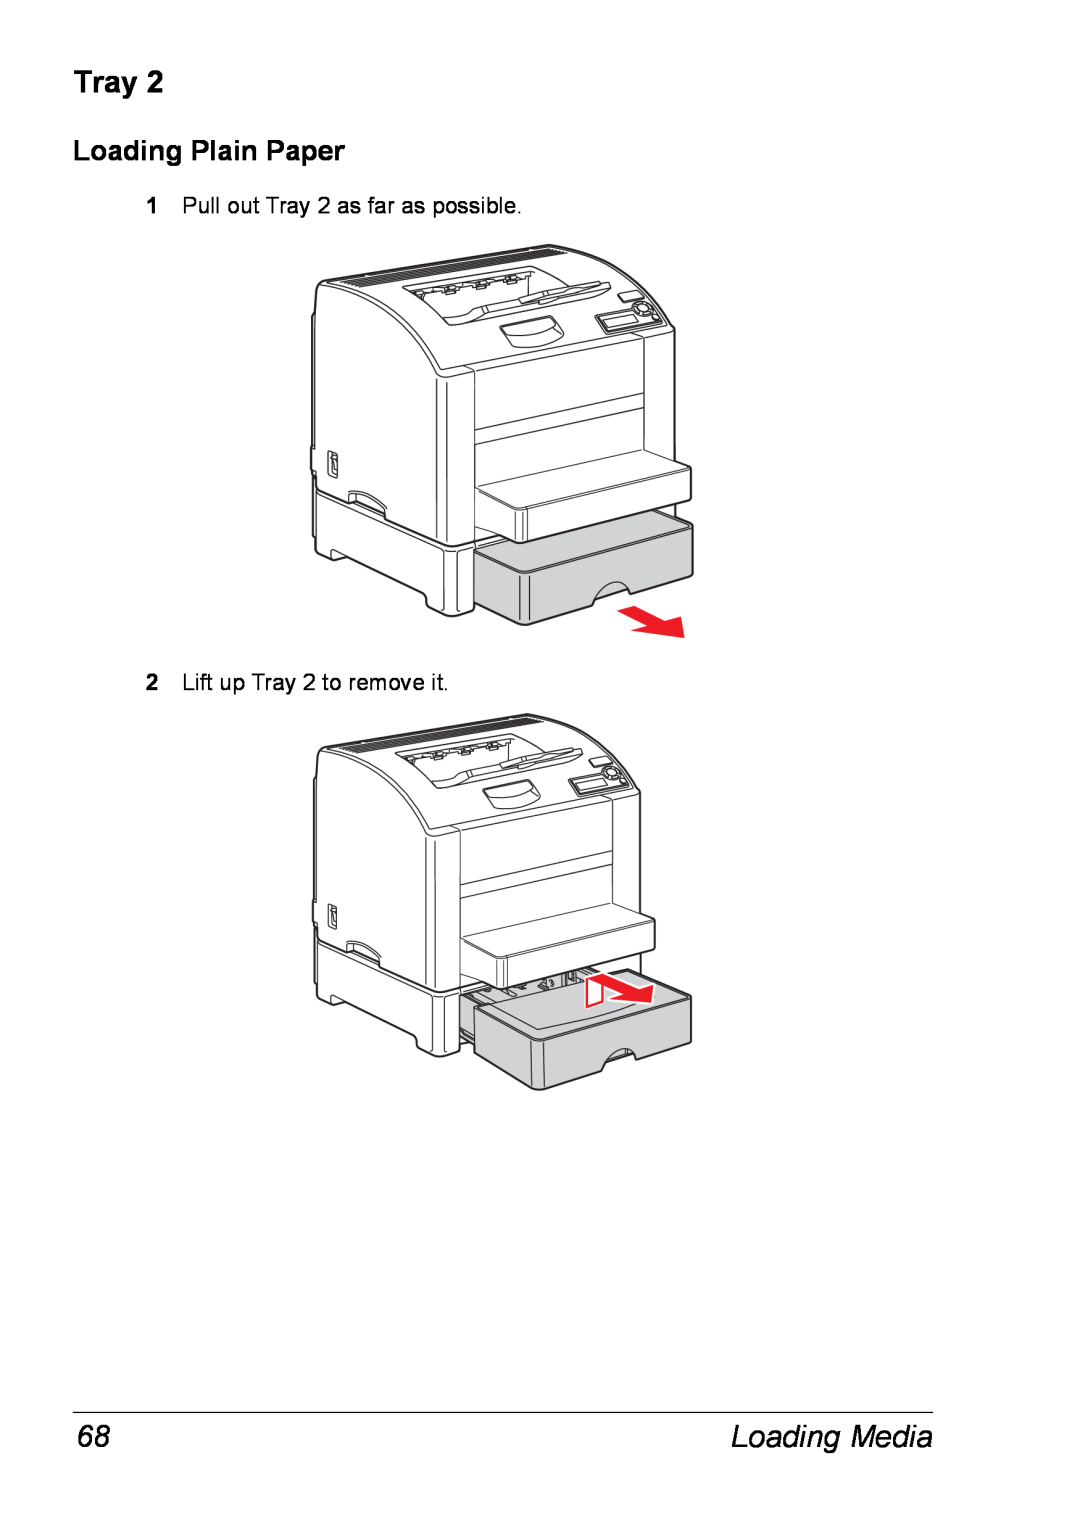 Xerox 6120 manual Loading Plain Paper, Loading Media, Pull out Tray 2 as far as possible 2 Lift up Tray 2 to remove it 